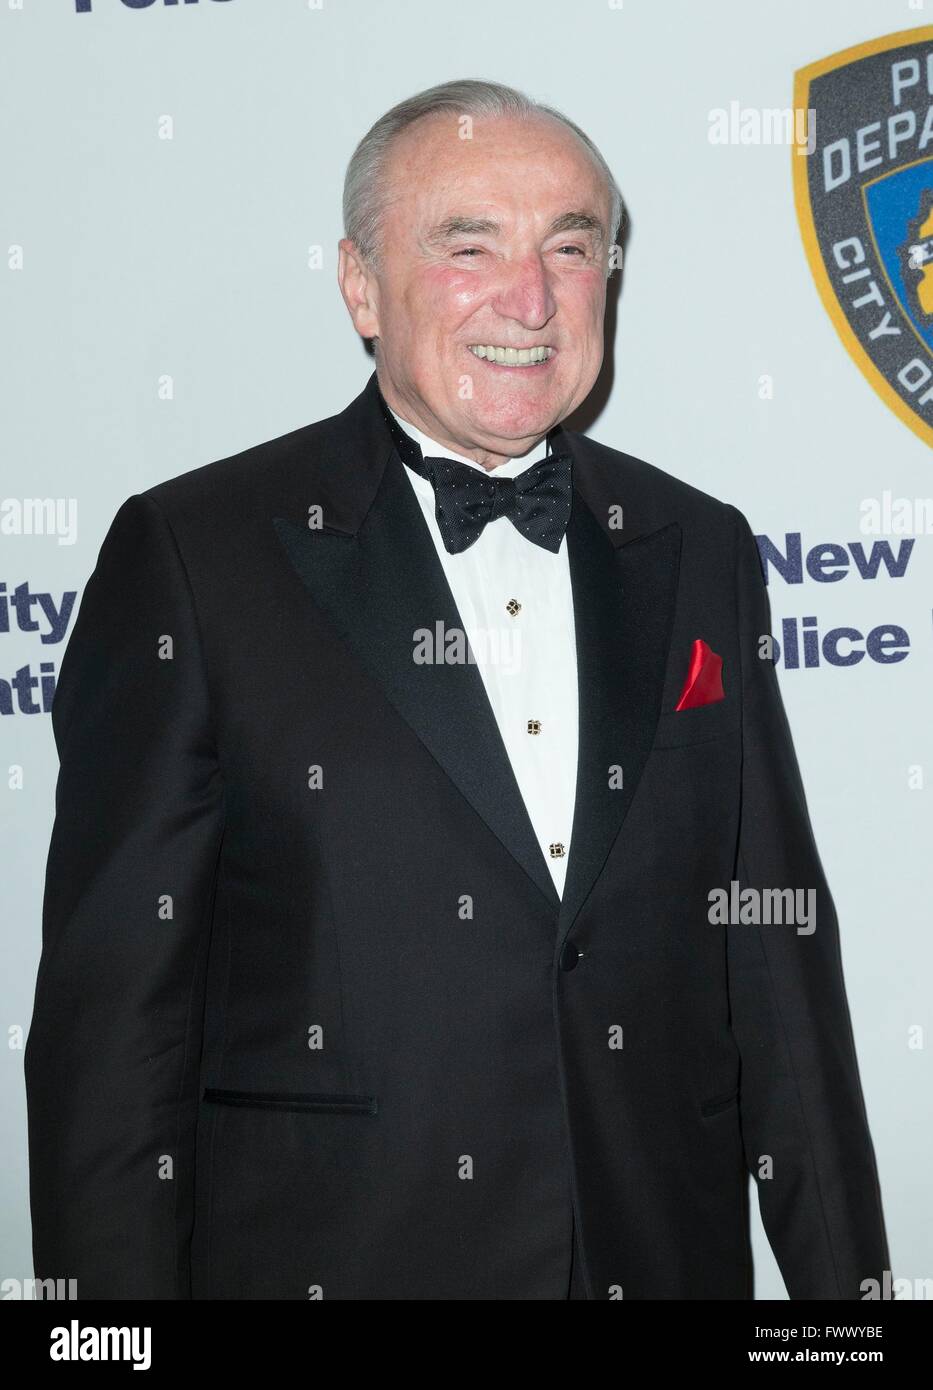 New York, NY, USA. 7th Apr, 2016. William Bratton at arrivals for New York City Police Foundation's 2016 Gala, The Waldorf-Astoria, New York, NY April 7, 2016. © Lev Radin/Everett Collection/Alamy Live News Stock Photo